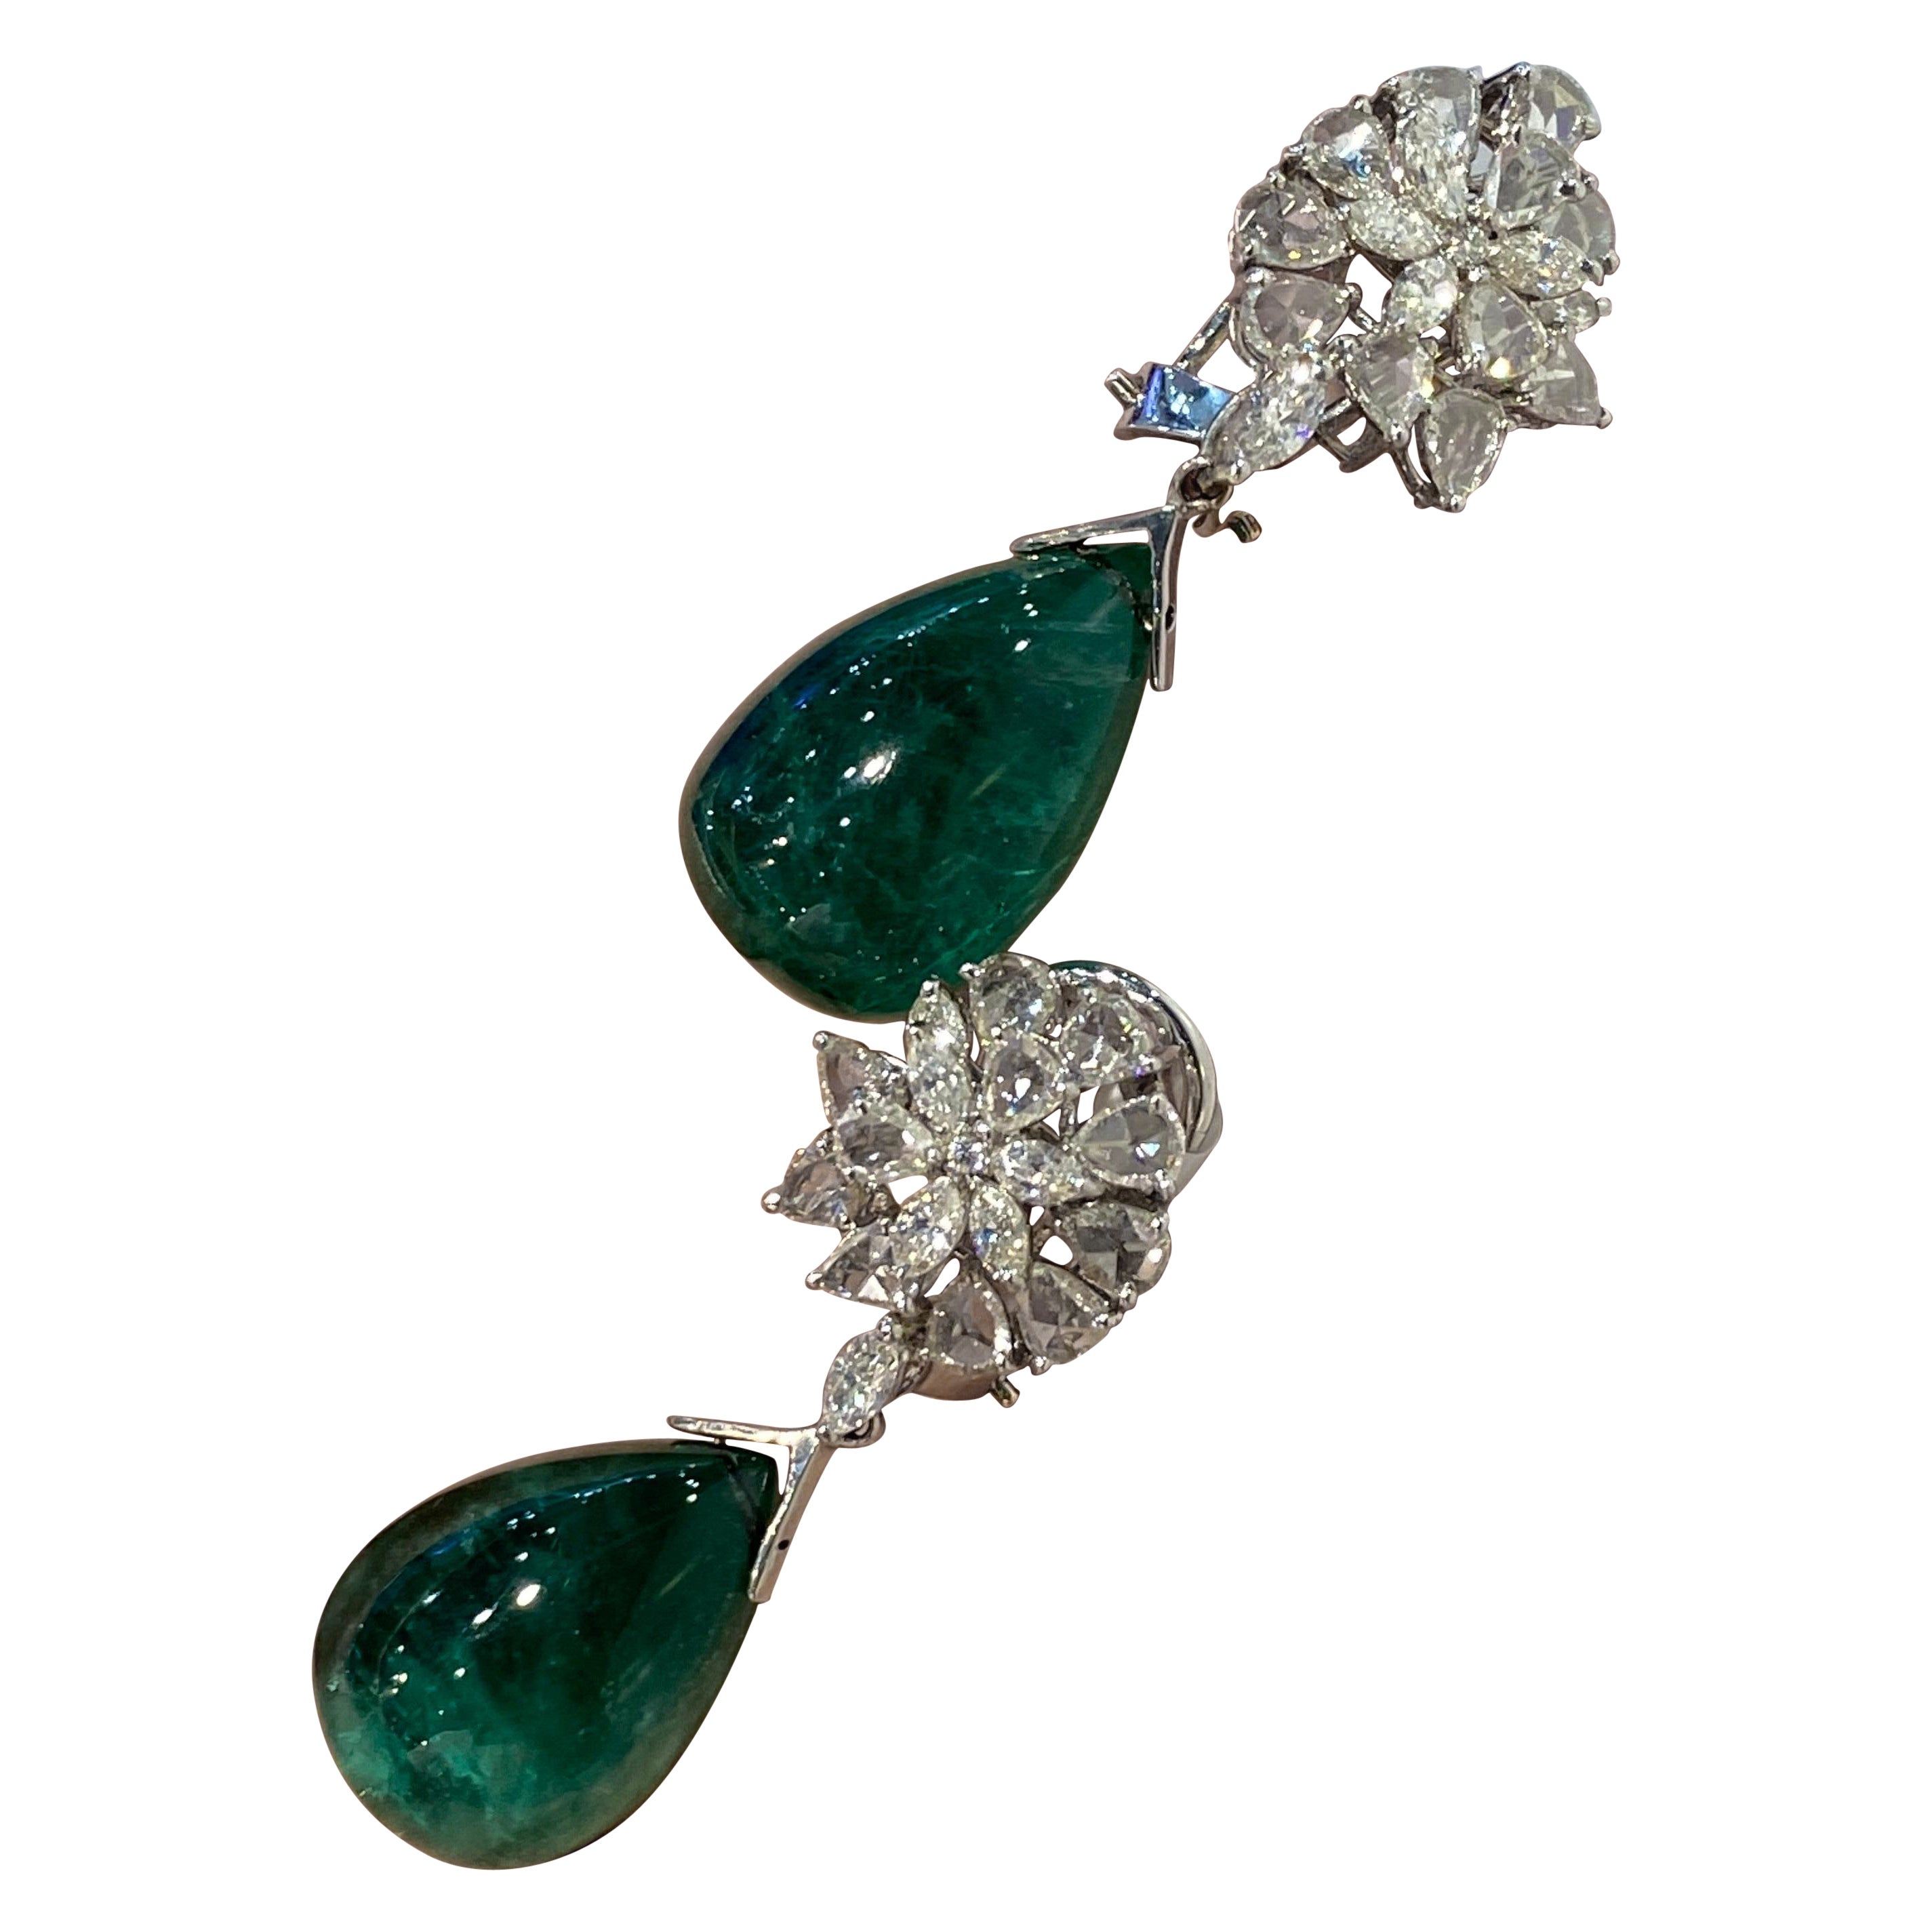 46.1 Carat Emerald Drops Earrings with Diamonds For Sale